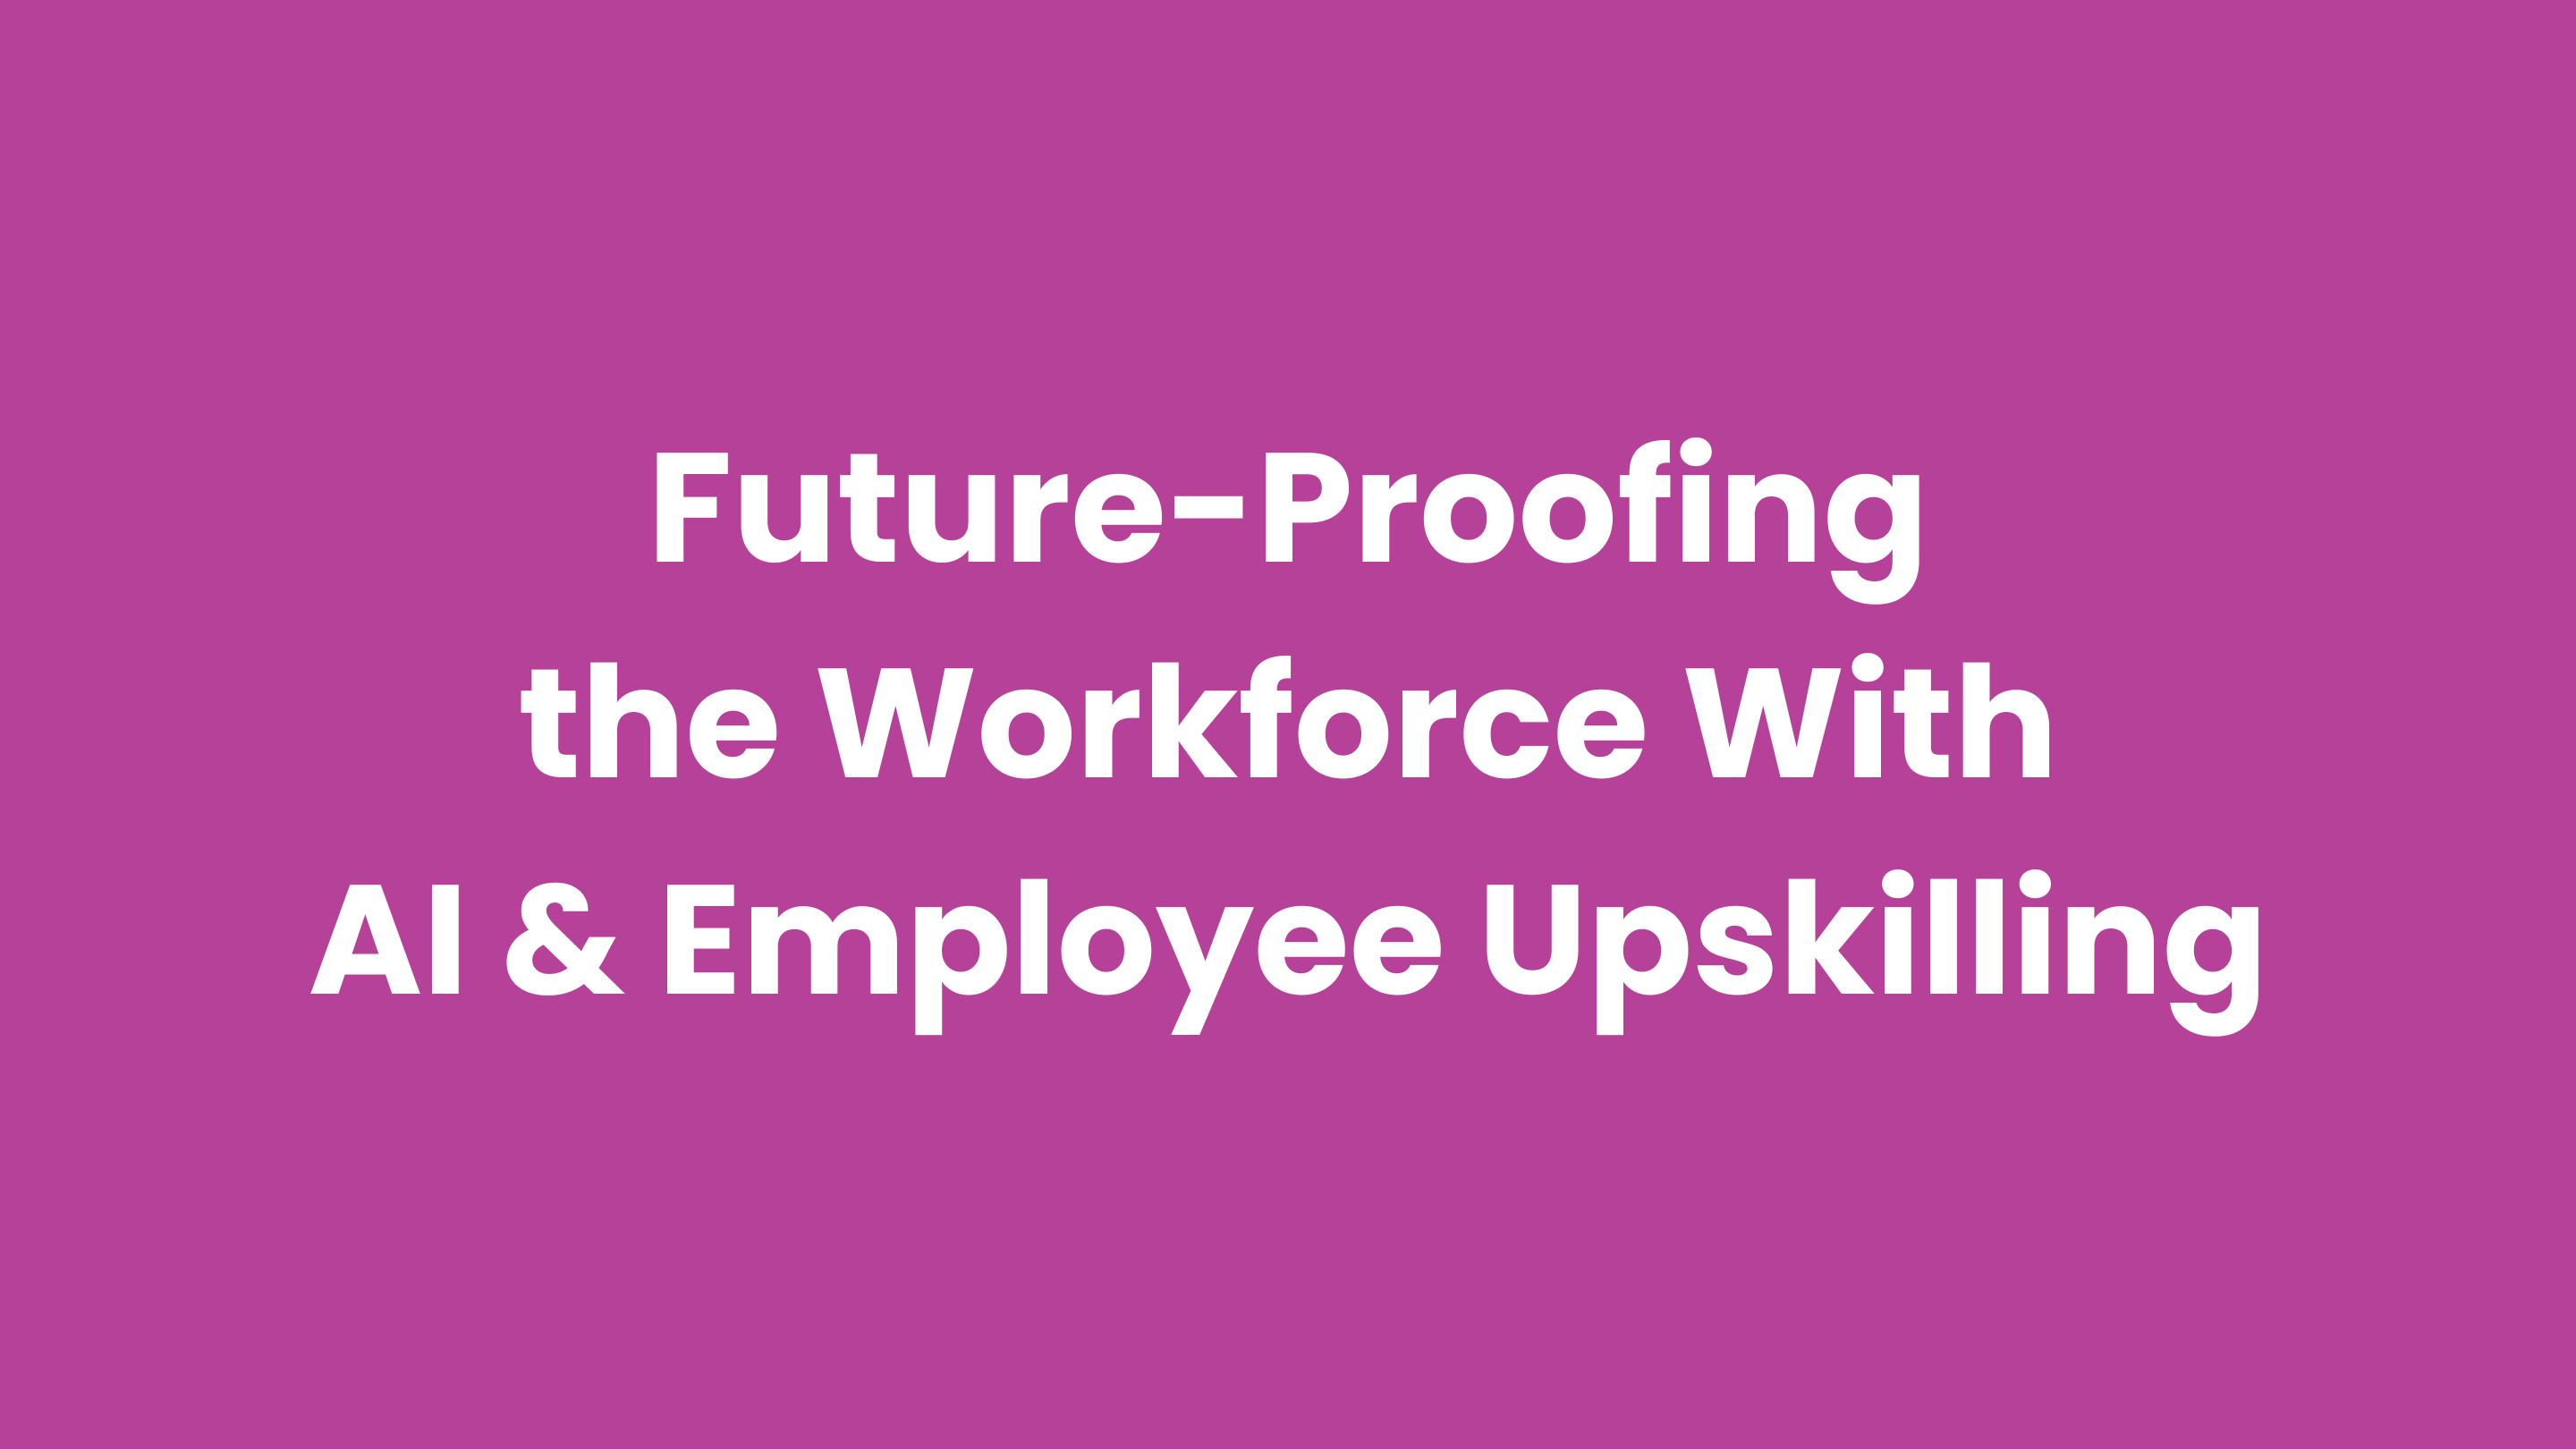 Employee upskilling and AI for the future workforce